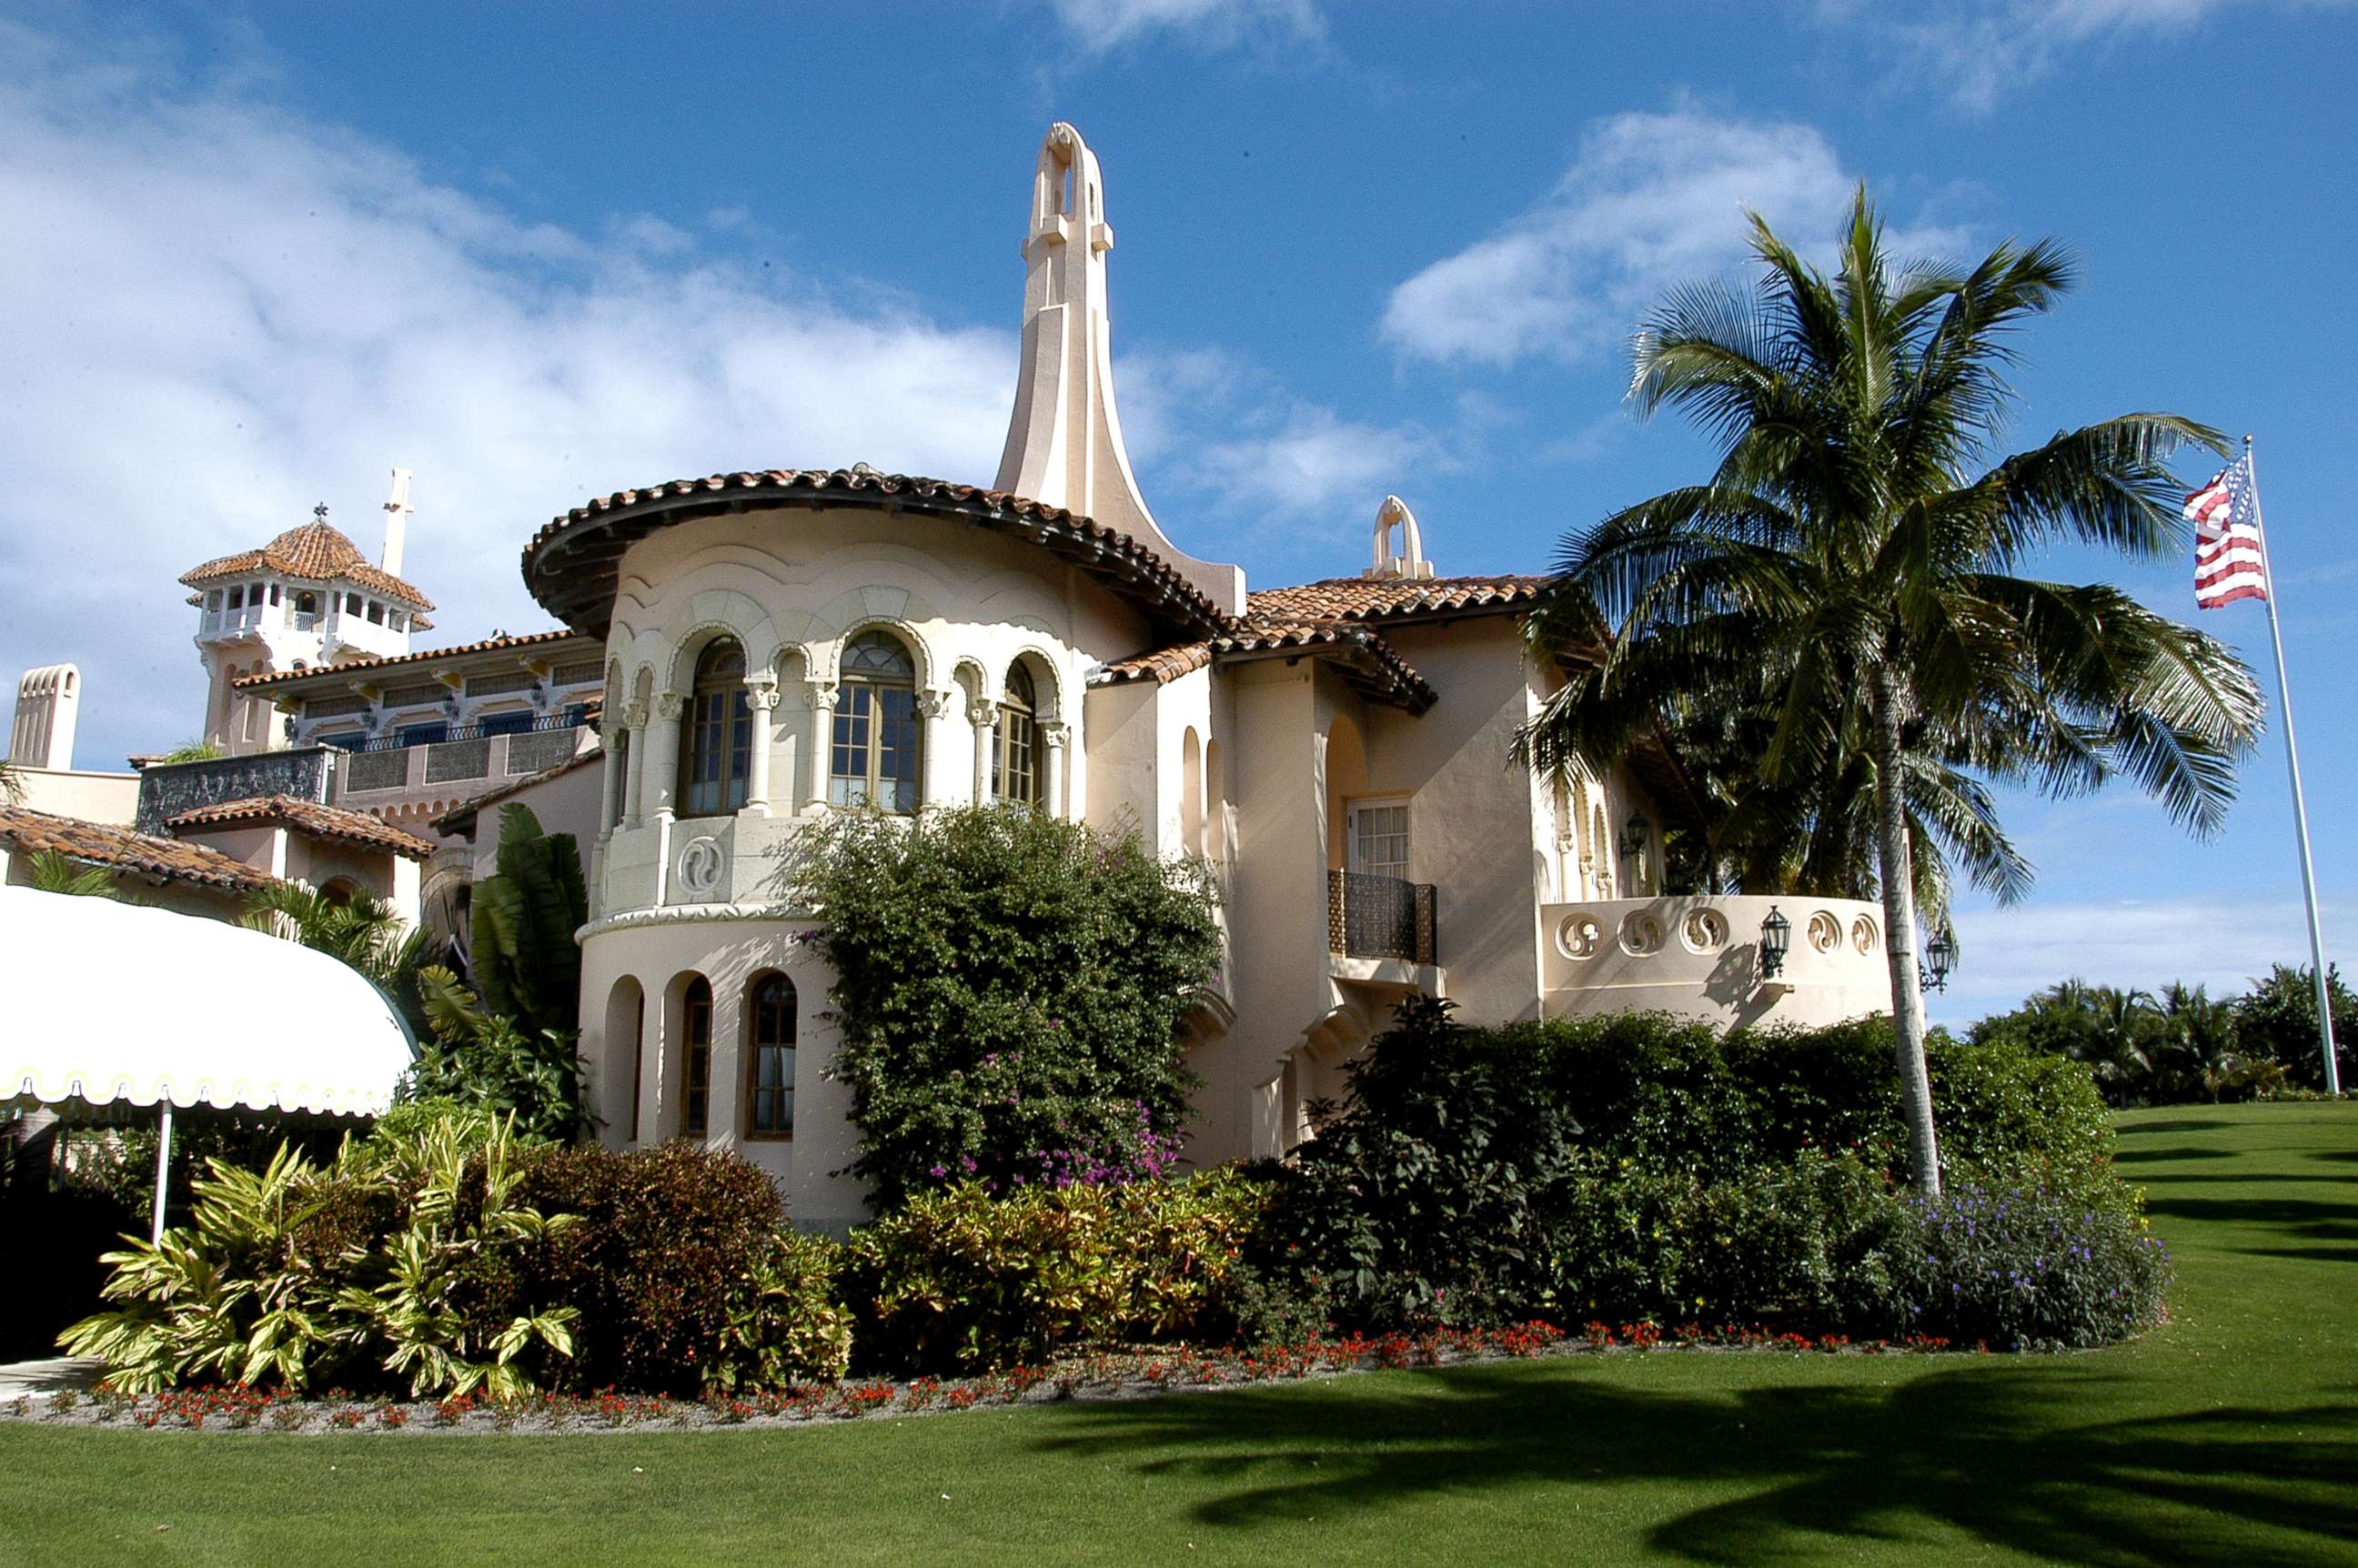 PHOTO: Exterior view of the south side of the Mar-a-Lago estate, Palm Beach, Fla., Jan. 9, 2008.